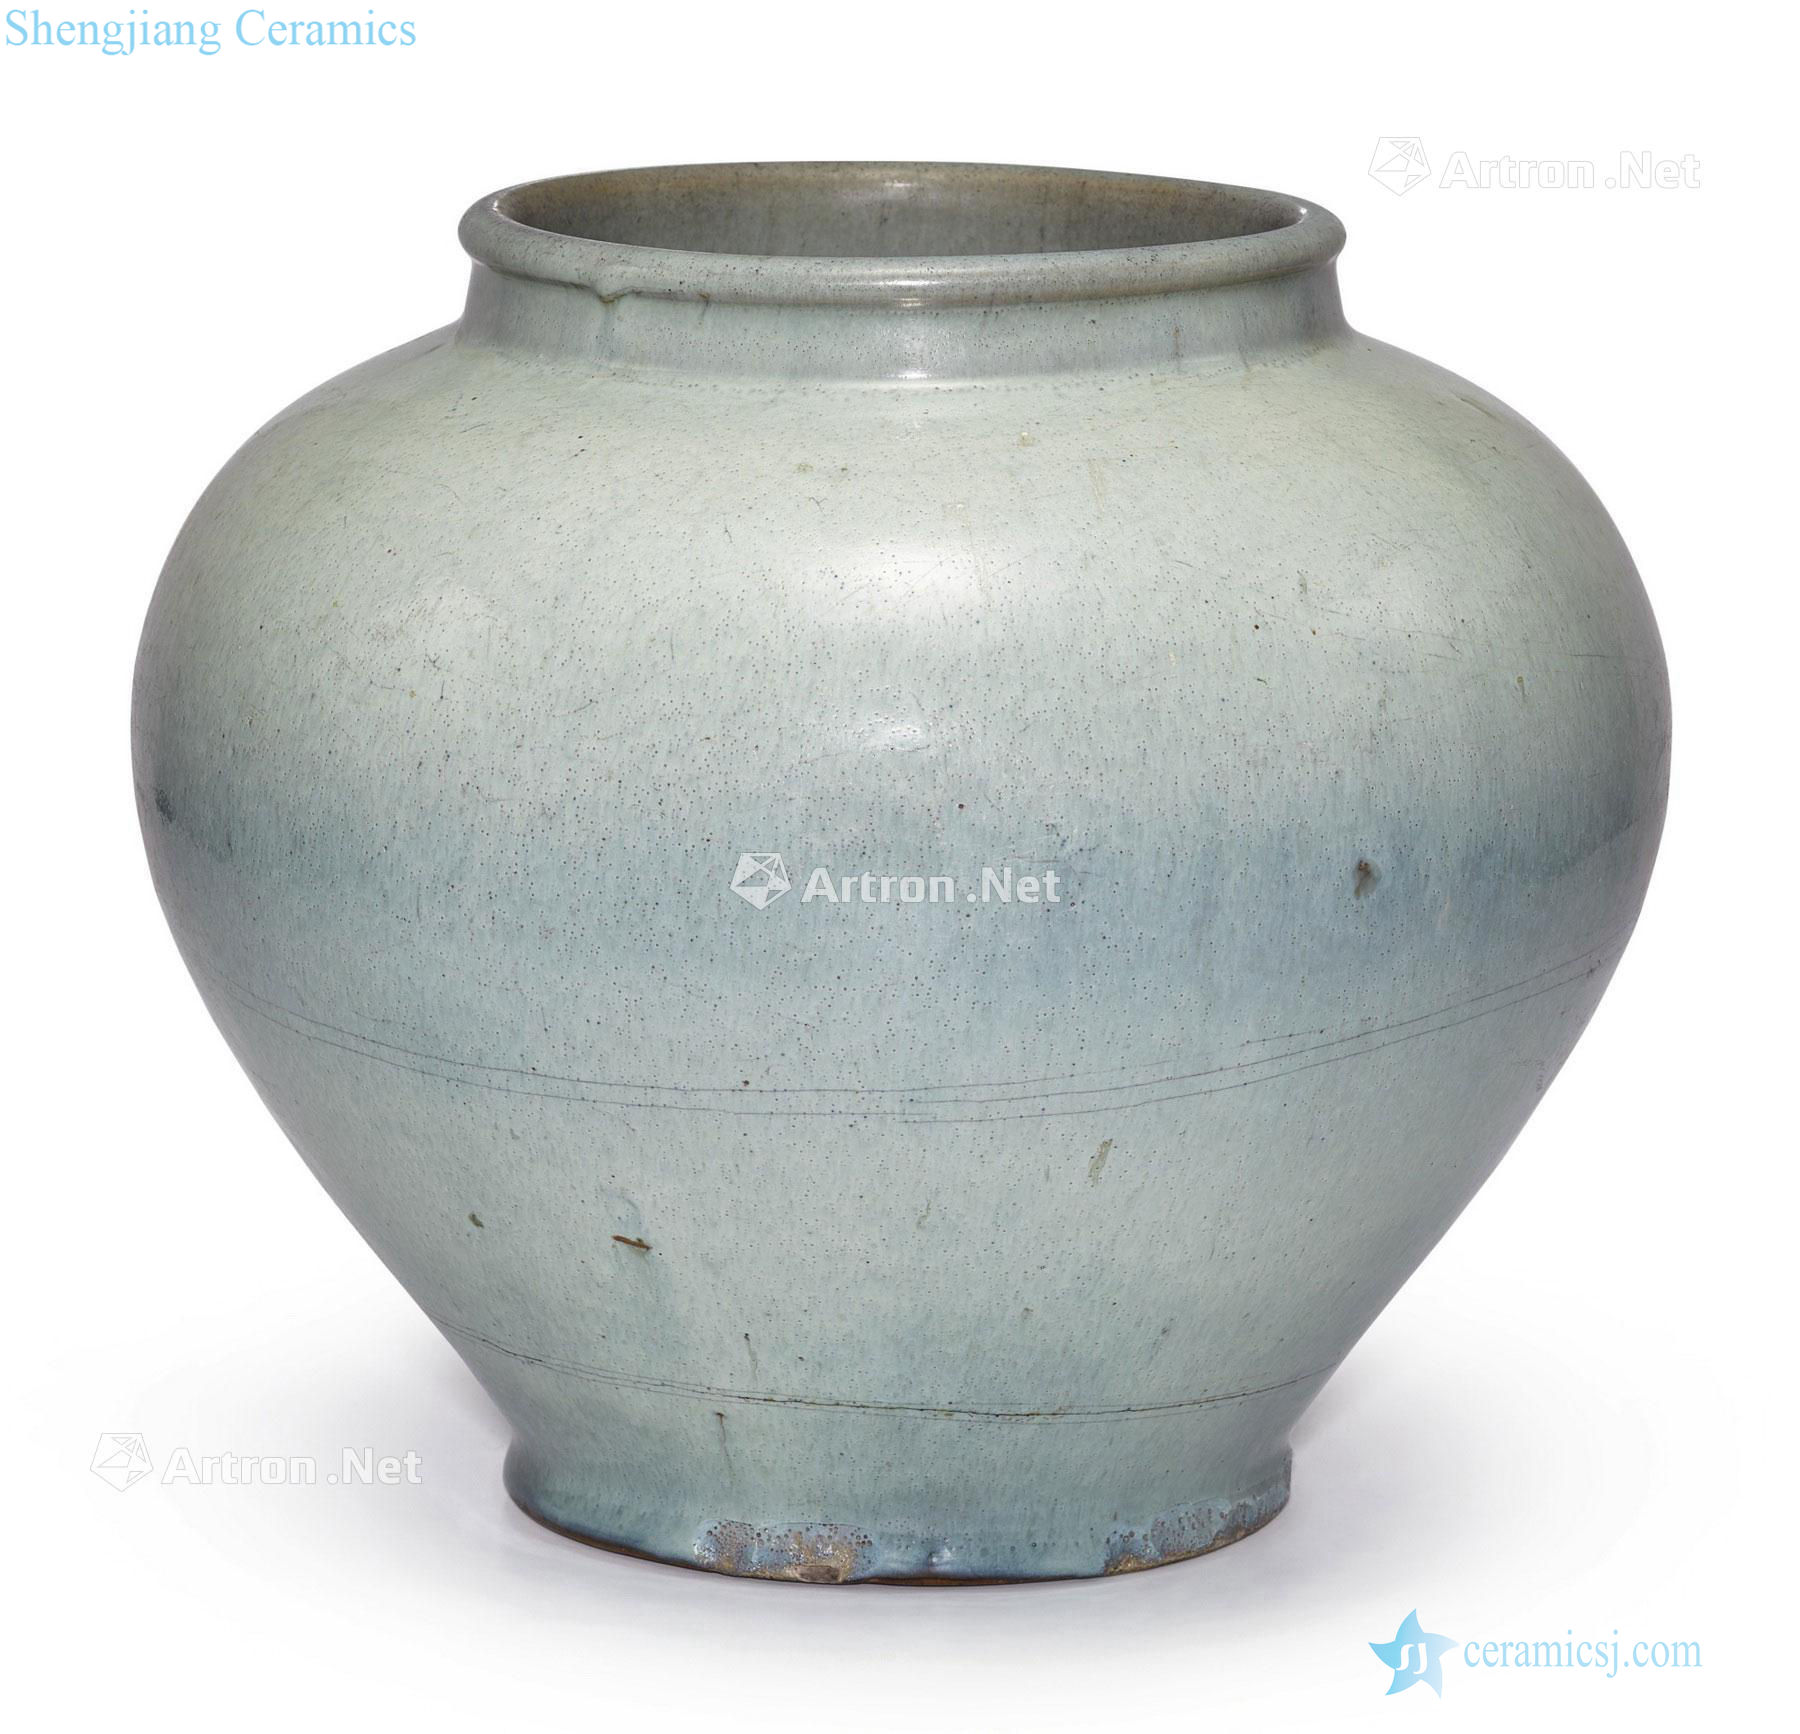 Yuan and Ming Sky blue glaze masterpieces cans